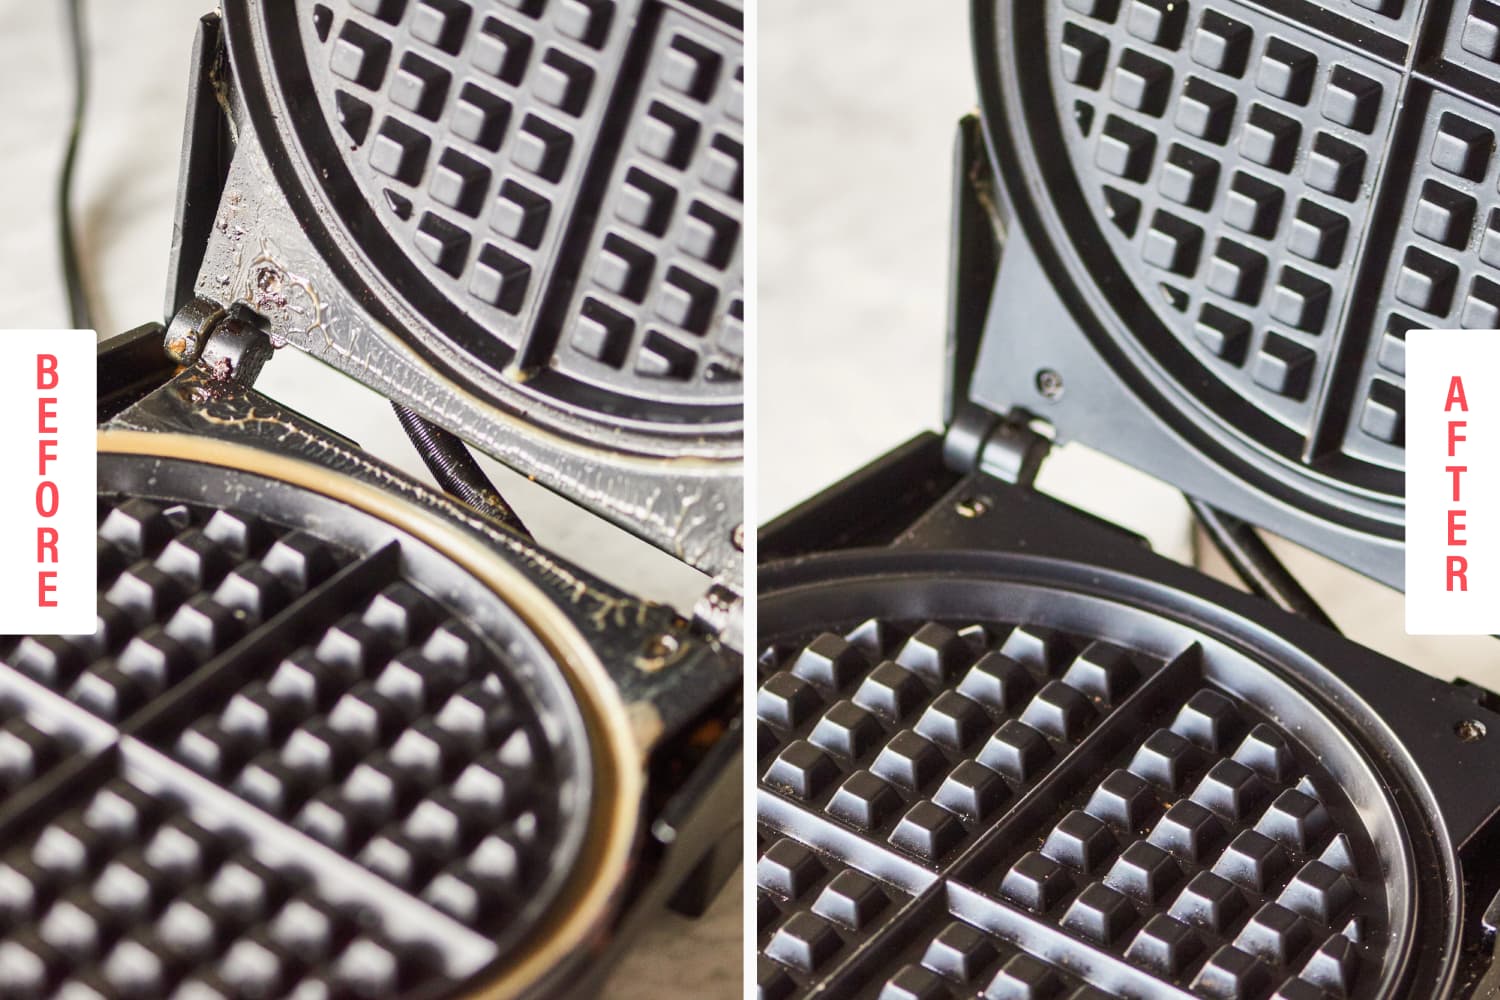 How To Clean an Impossibly Gross Waffle Maker - Flipboard